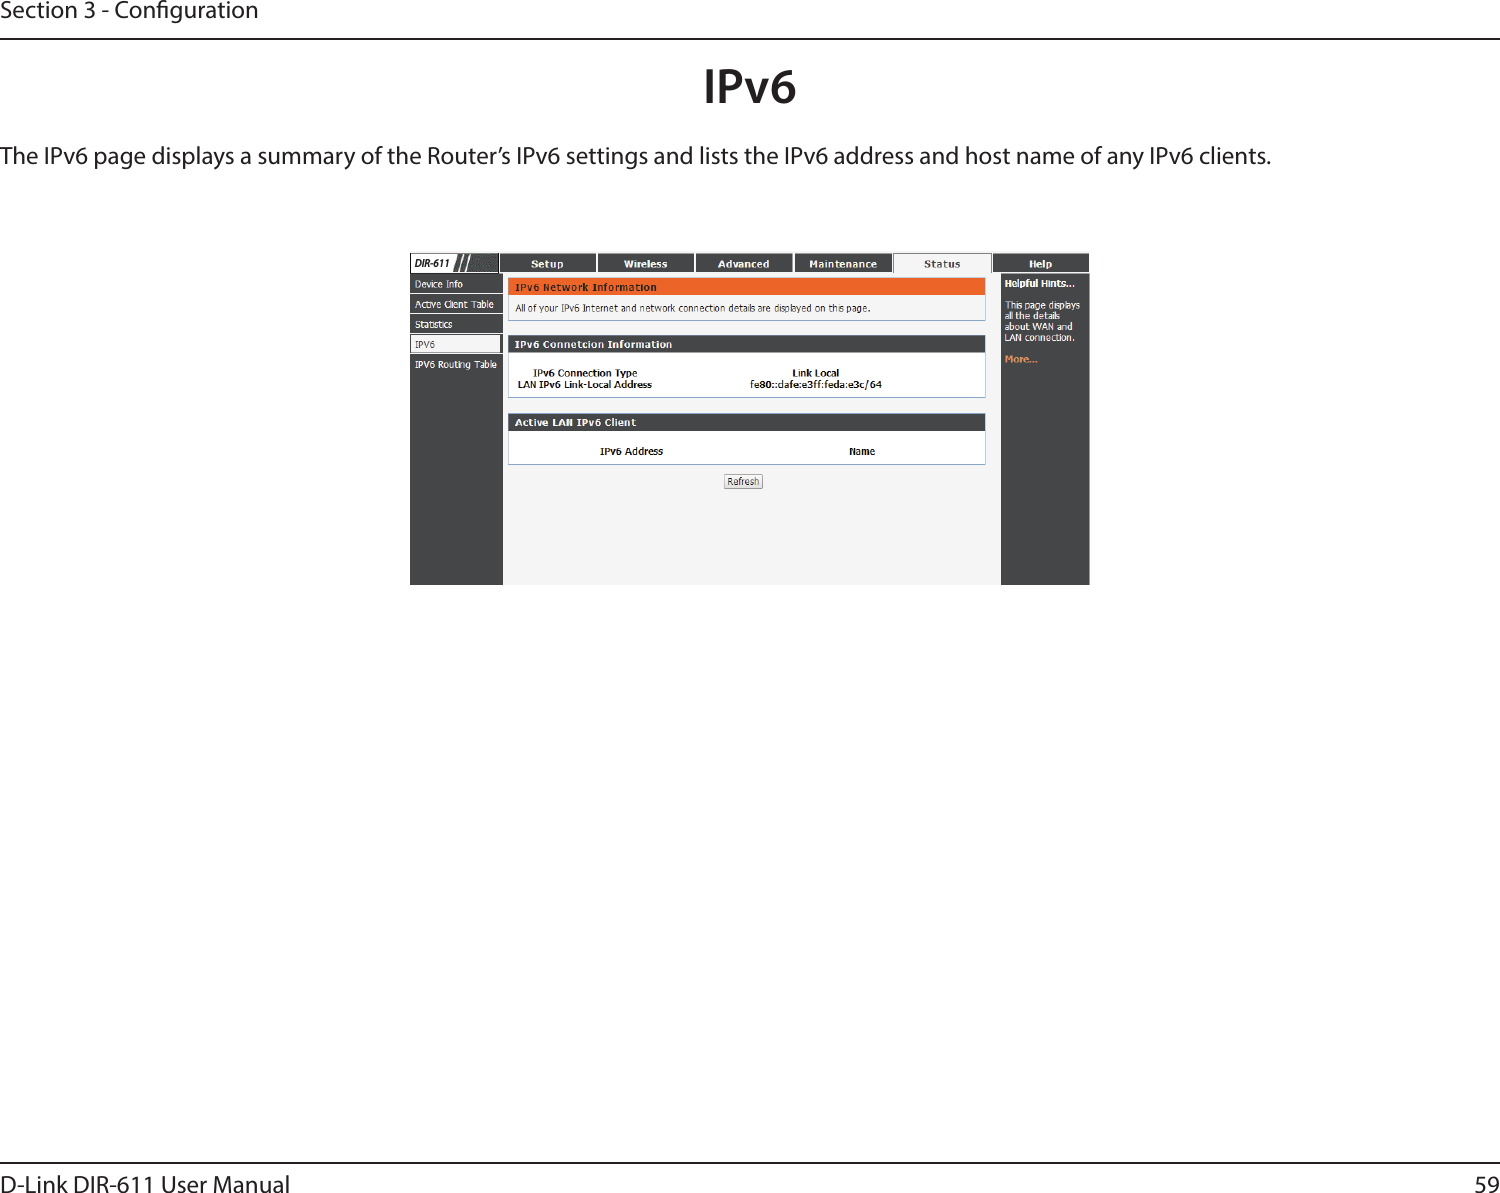 59D-Link DIR-611 User ManualSection 3 - CongurationIPv6The IPv6 page displays a summary of the Router’s IPv6 settings and lists the IPv6 address and host name of any IPv6 clients. DIR-611